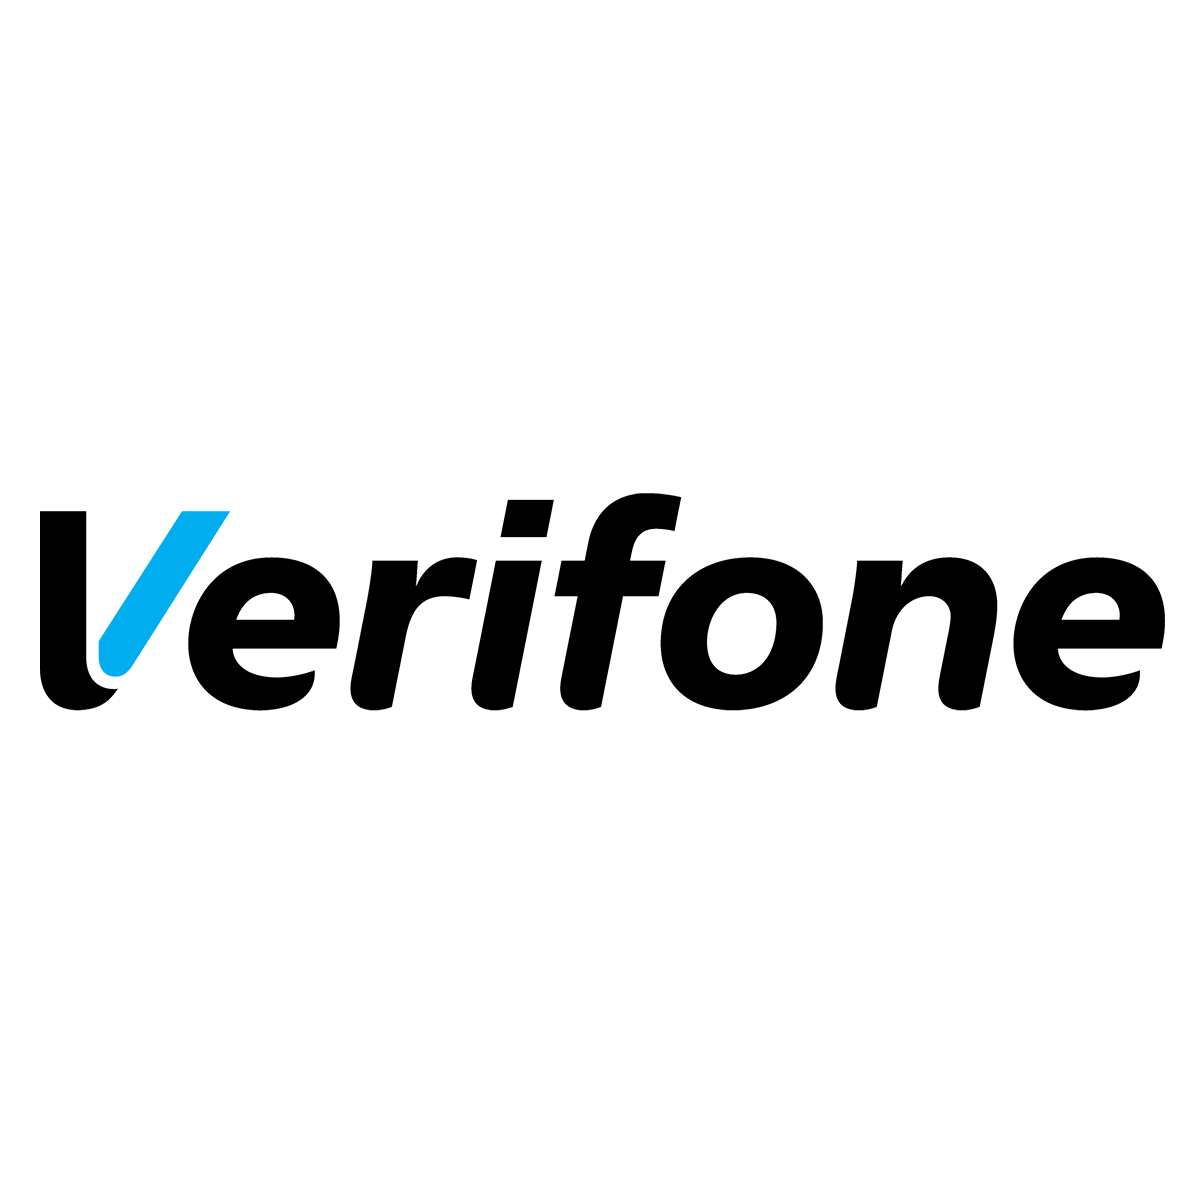 FHQ_logos_Verifone.png